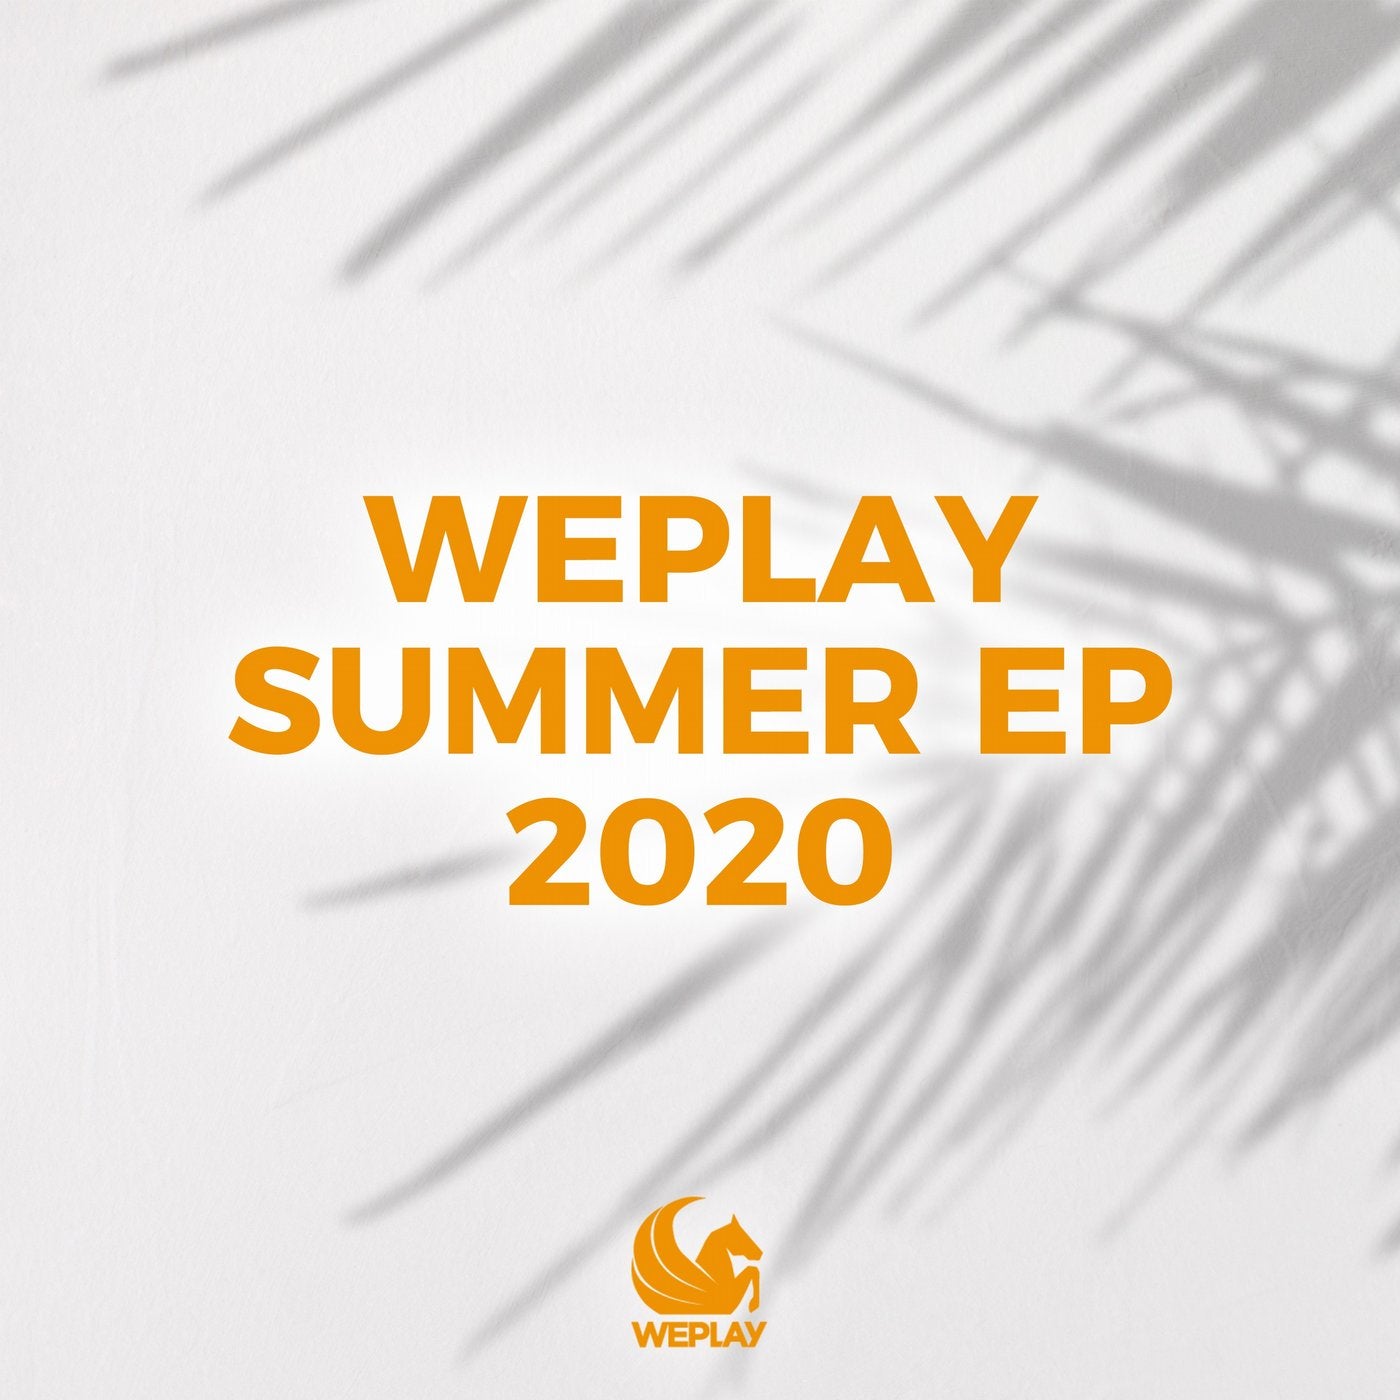 WEPLAY Summer EP 2020